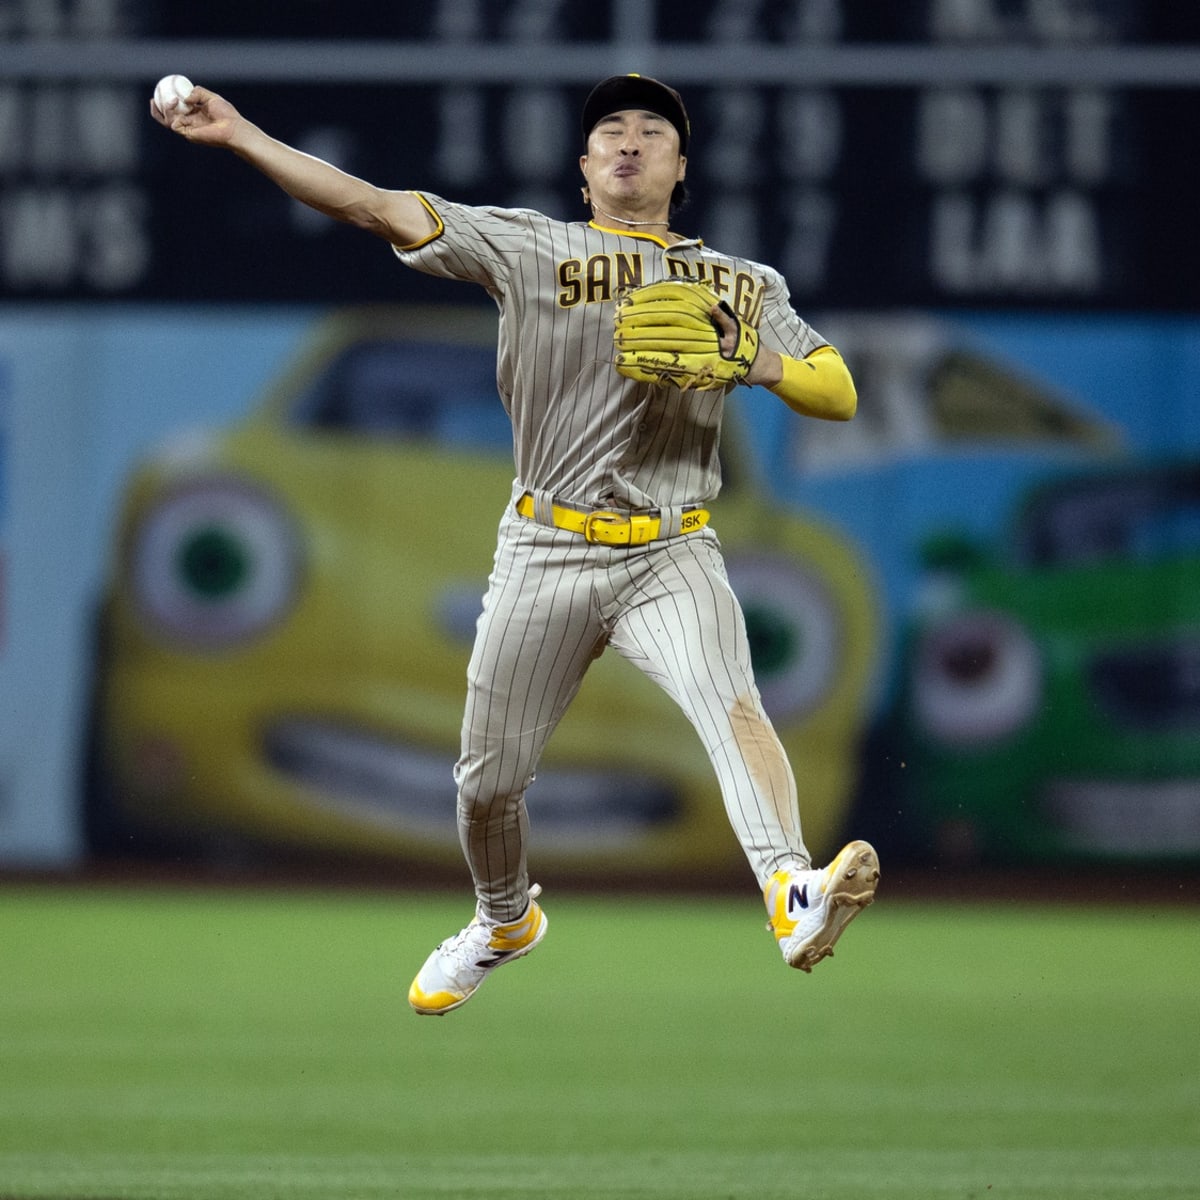 Ha-Seong Kim, The Free Agent That Every Team Should Sign